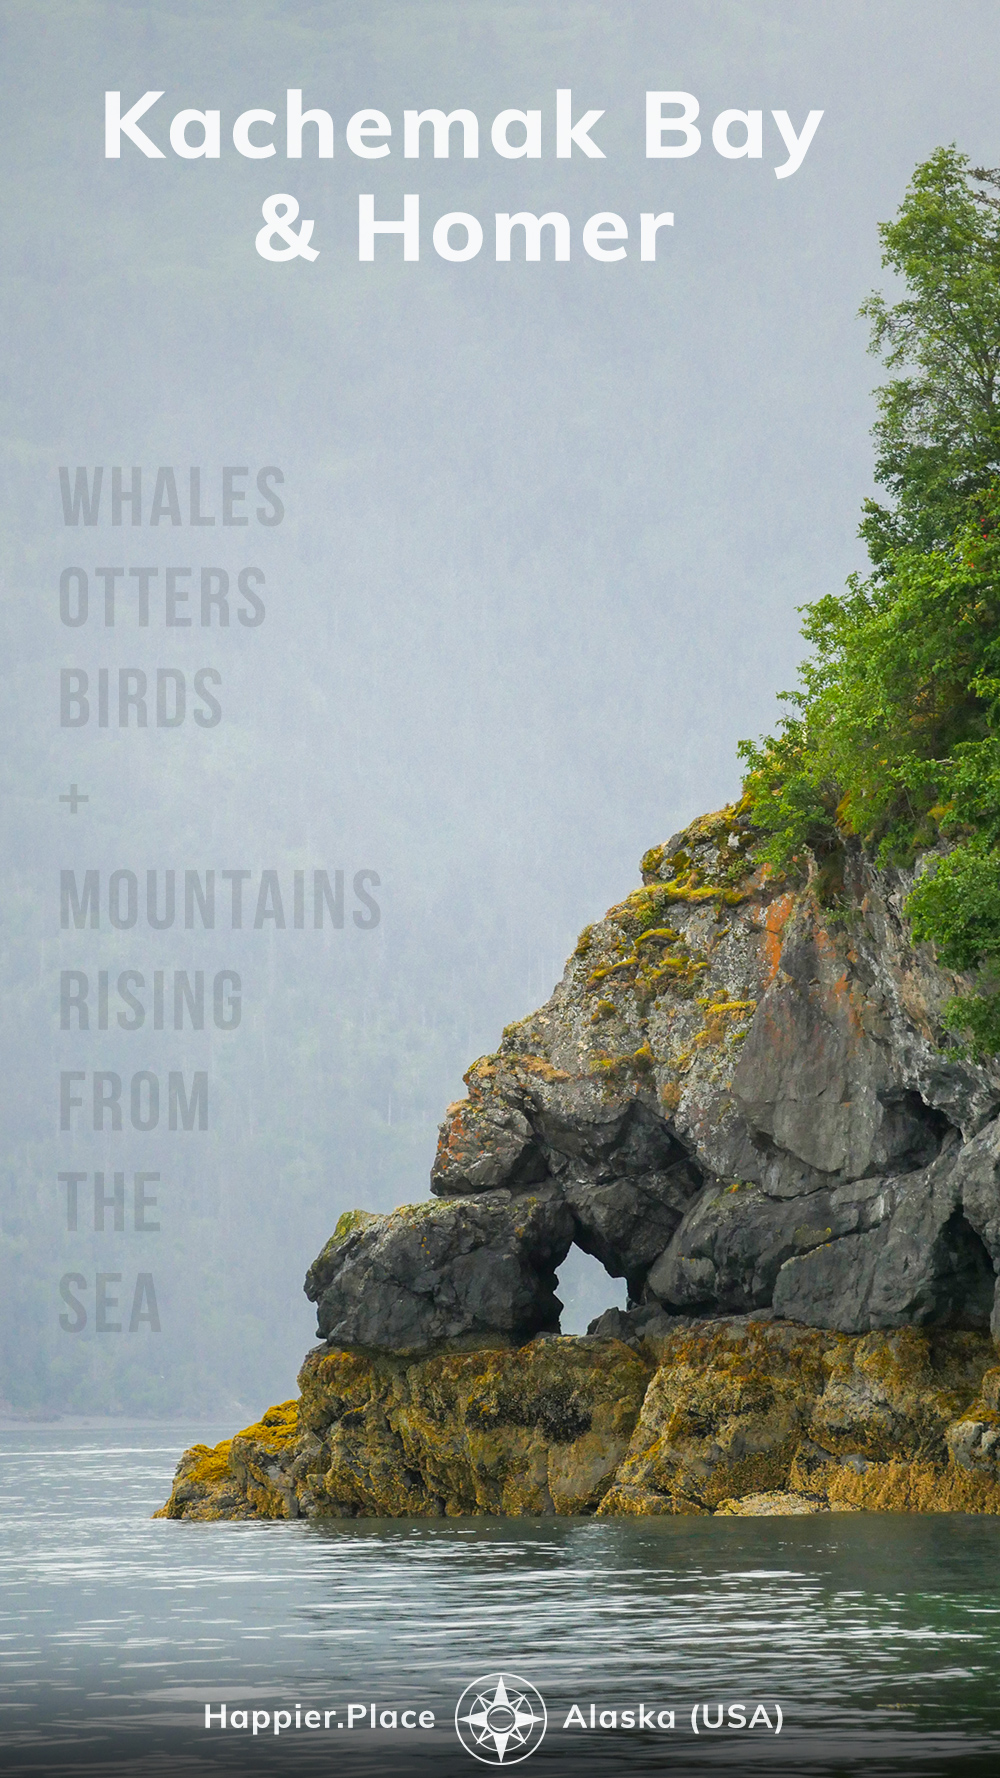 Kachemack Bay and Homer Alaska, whales, otters, birds, mountains rising from the sea